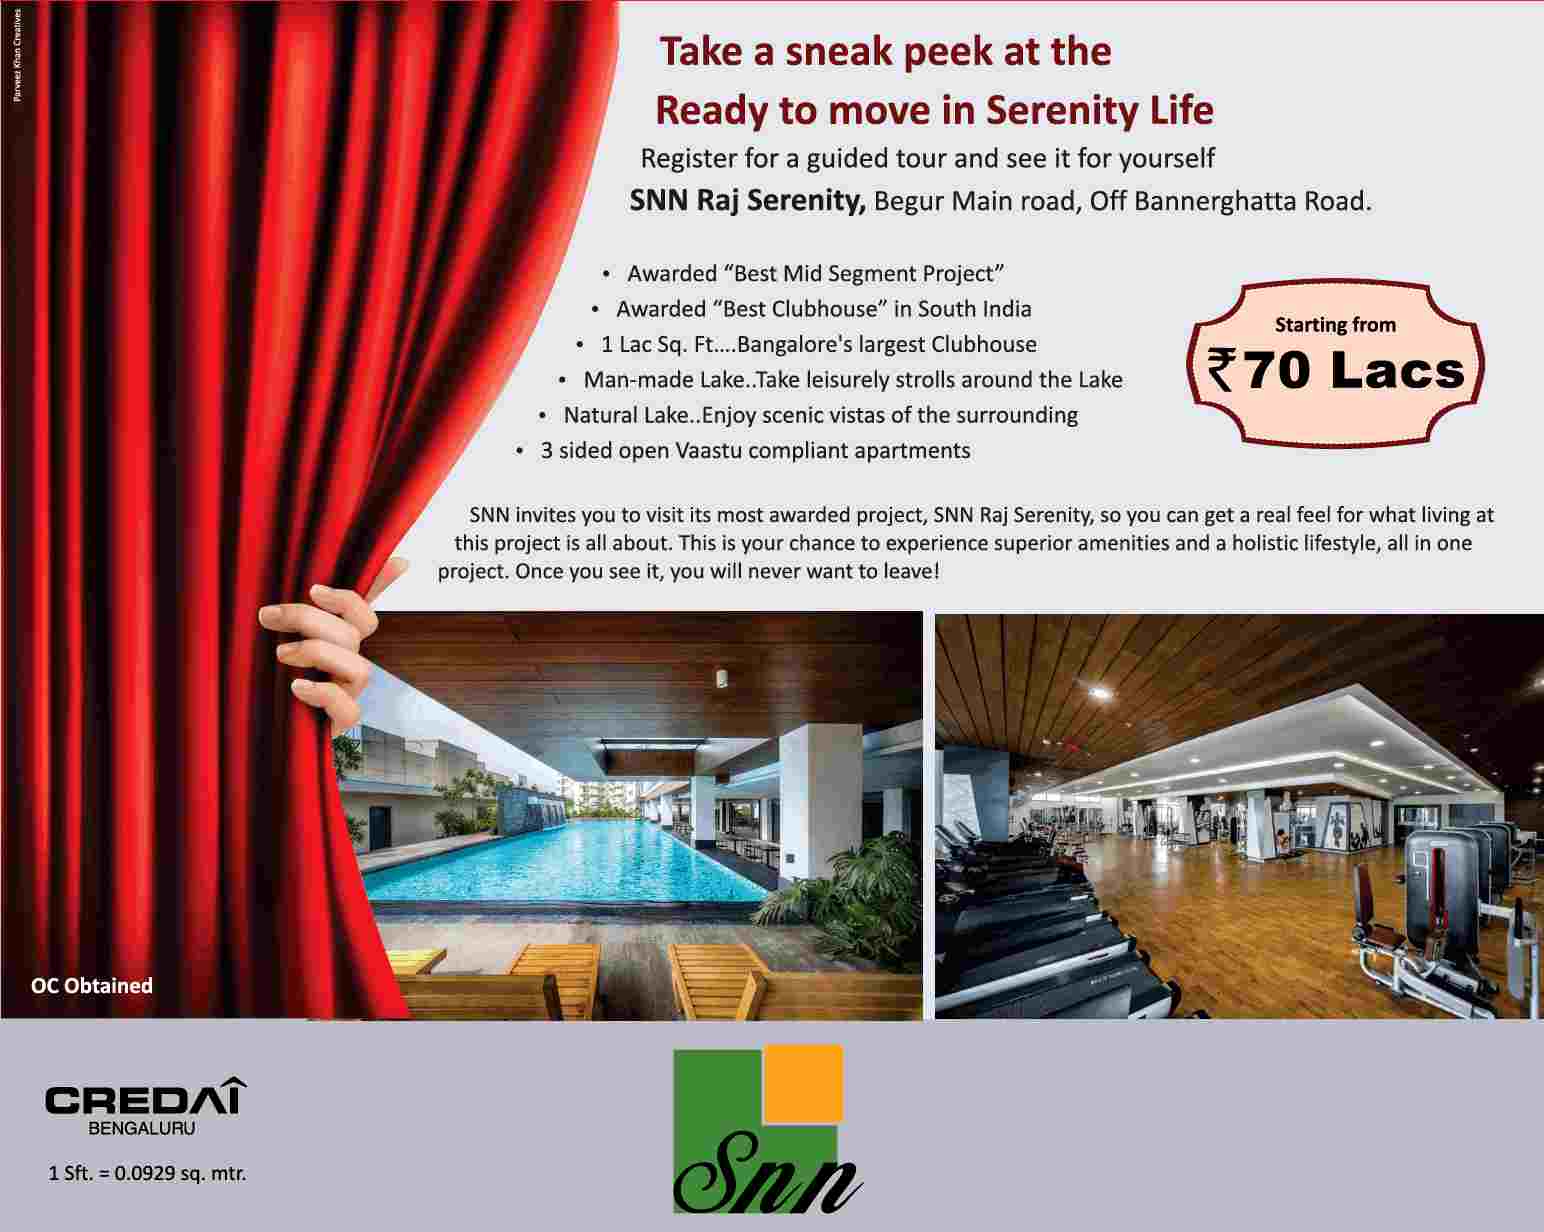 Experience superior amenities and a holistic lifestyle at SNN Raj Serenity in Bangalore Update